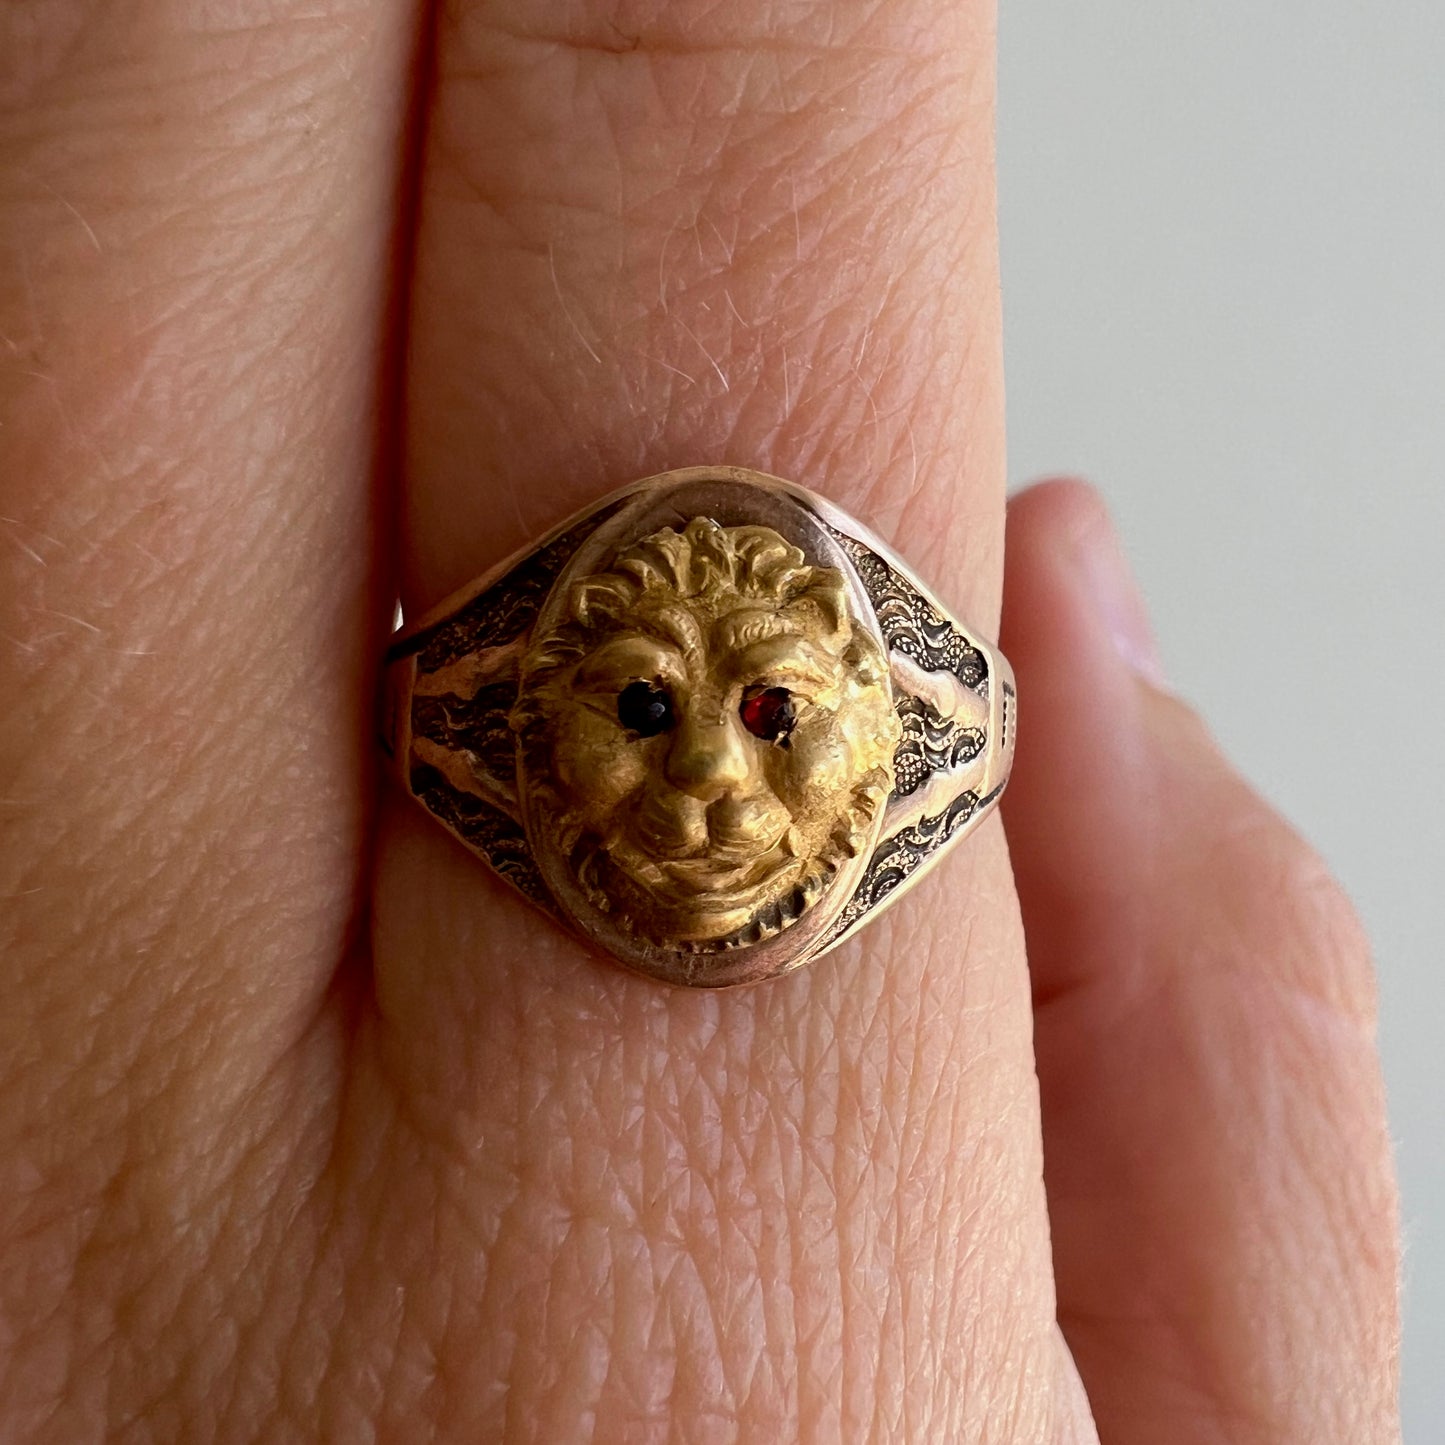 reimagined V I N T A G E // sunshine beast / 10k rose and yellow gold signet lion sun ring / size 7